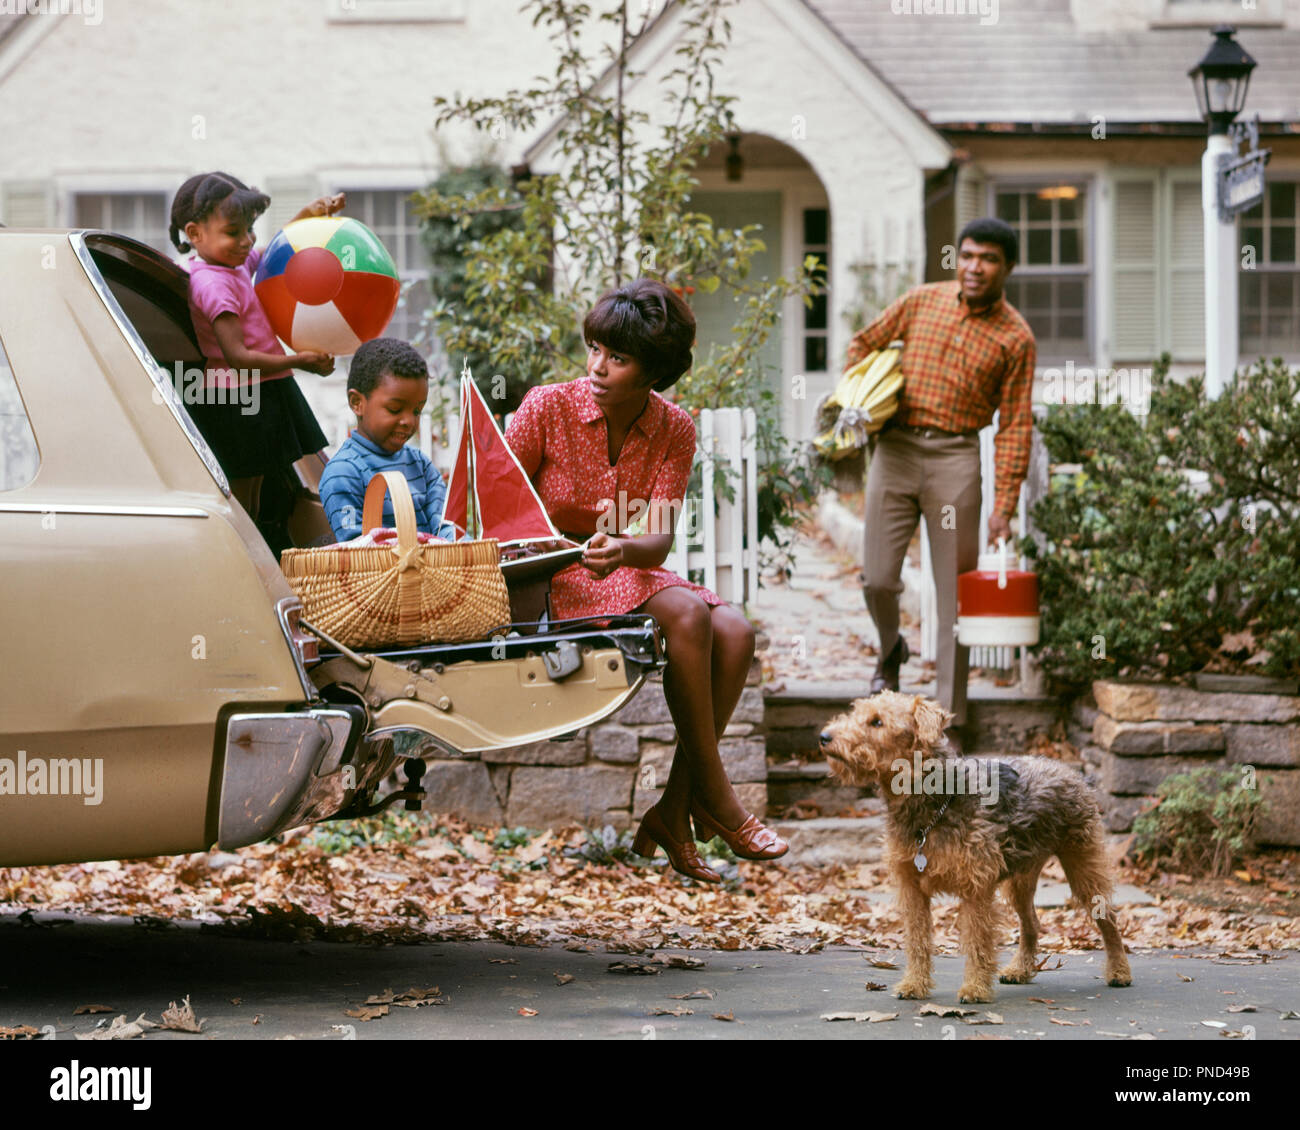 1970s AFRICAN AMERICAN FAMILY OF FOUR LOADING CAR FOR PICNIC MAN WOMAN BOY GIRL - km3317 PHT001 HARS FUN CARS TOGETHER HUSBAND DOGS FOUR ETHNIC NOSTALGIC 4 SUBURBAN COLOR RELATIONSHIP MOTHERS OLD TIME NOSTALGIA OLD FASHION AUTO JUVENILE MOTOR VEHICLE FRIEND YOUNG ADULT TEAMWORK FAMILIES JOY LIFESTYLE PARENTING FEMALES RELATION HUSBANDS GROWNUP HEALTHINESS HOME LIFE COPY SPACE FRIENDSHIP HALF-LENGTH PERSONS GROWN-UP AUTOMOBILE MALES AMERICANS TRANSPORTATION FATHERS HUSBAND AND WIFE MEN AND WOMEN HUSBANDS AND WIVES LOADING HAPPINESS NOURISH ADVENTURE LEISURE MOTOR VEHICLE AFRICAN-AMERICANS Stock Photo